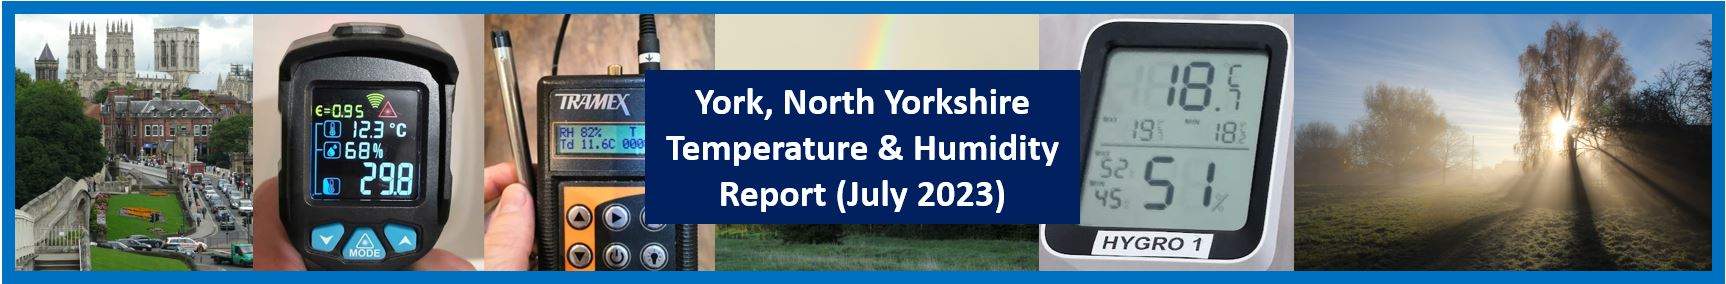 Temperature and Humidity in York - July 2023 Report